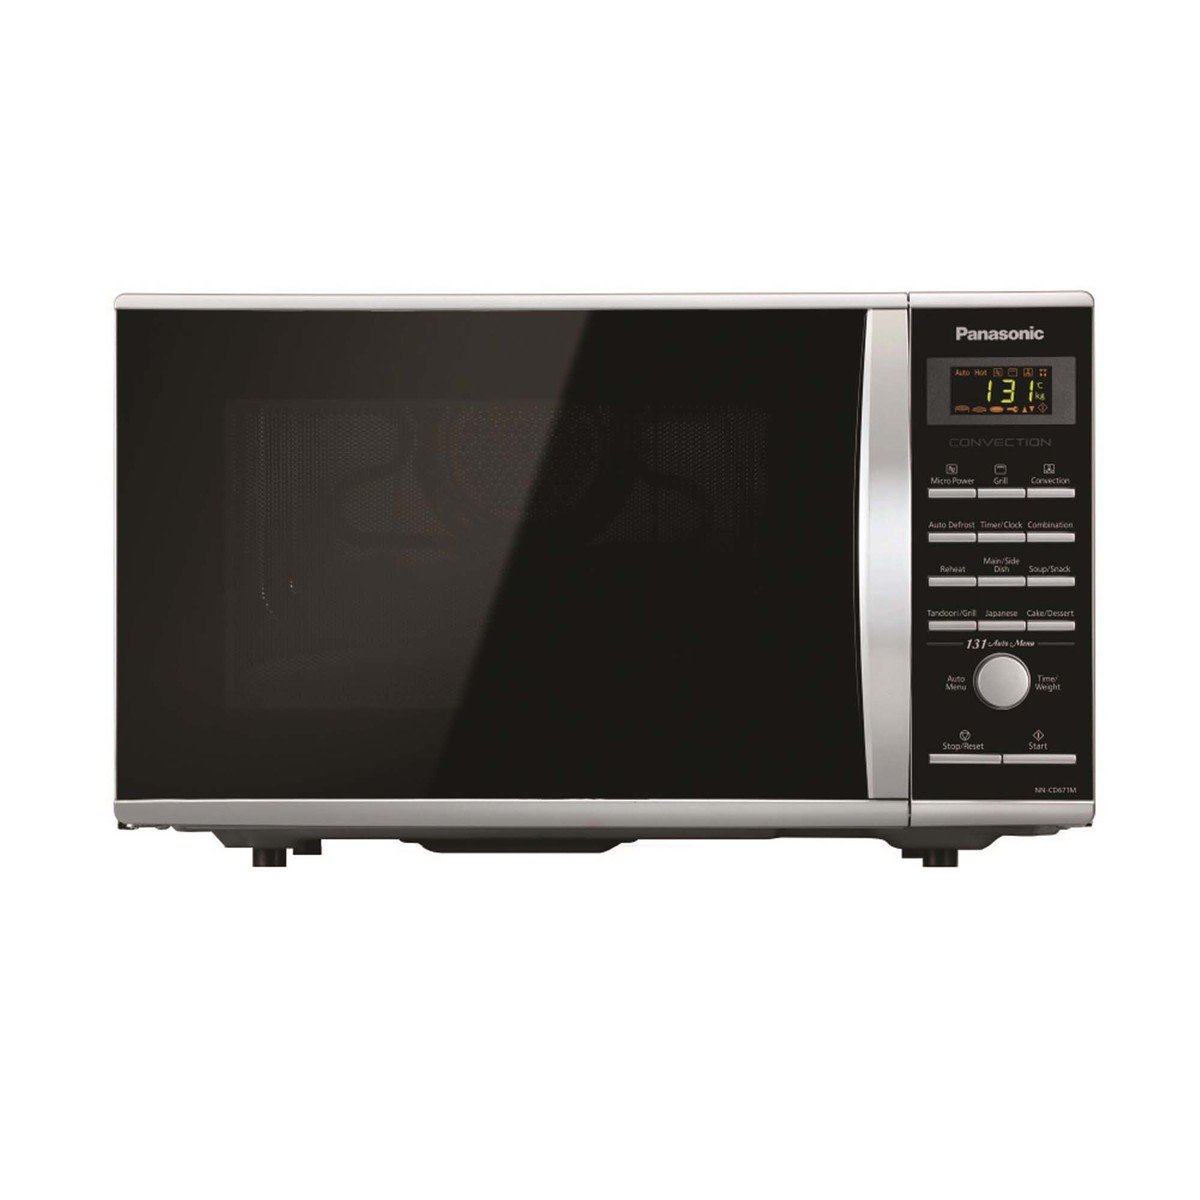 Buy Panasonic Convection Microwave Oven NNCD671 27Ltr Online at Best Price | Microwave Ovens | Lulu Kuwait in Kuwait